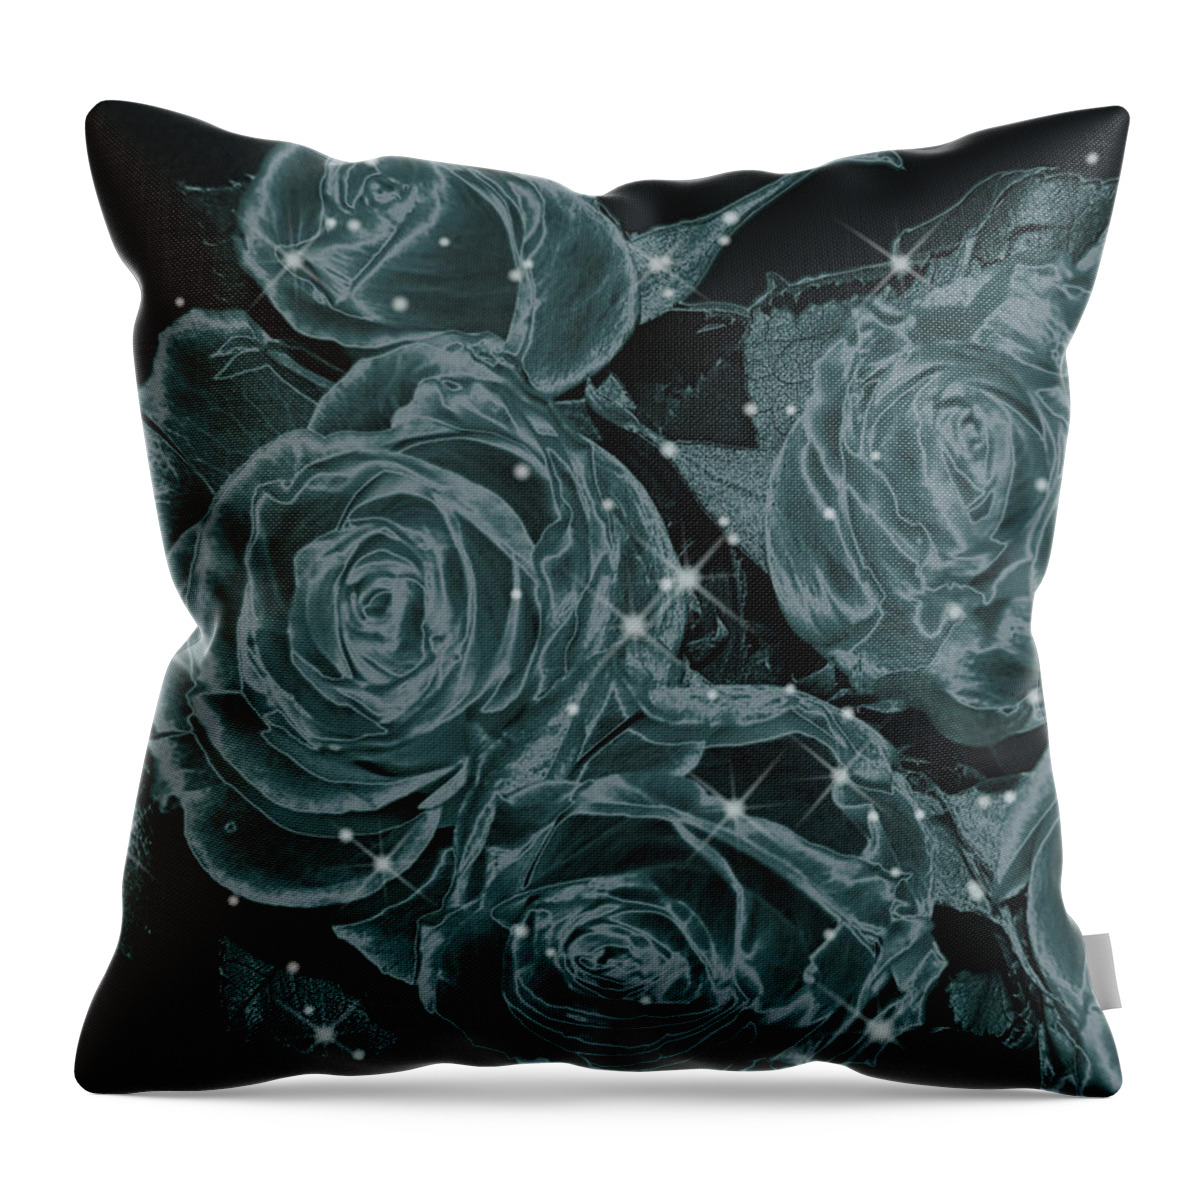 Floral Throw Pillow featuring the digital art Floral Constellation by Wendy J St Christopher